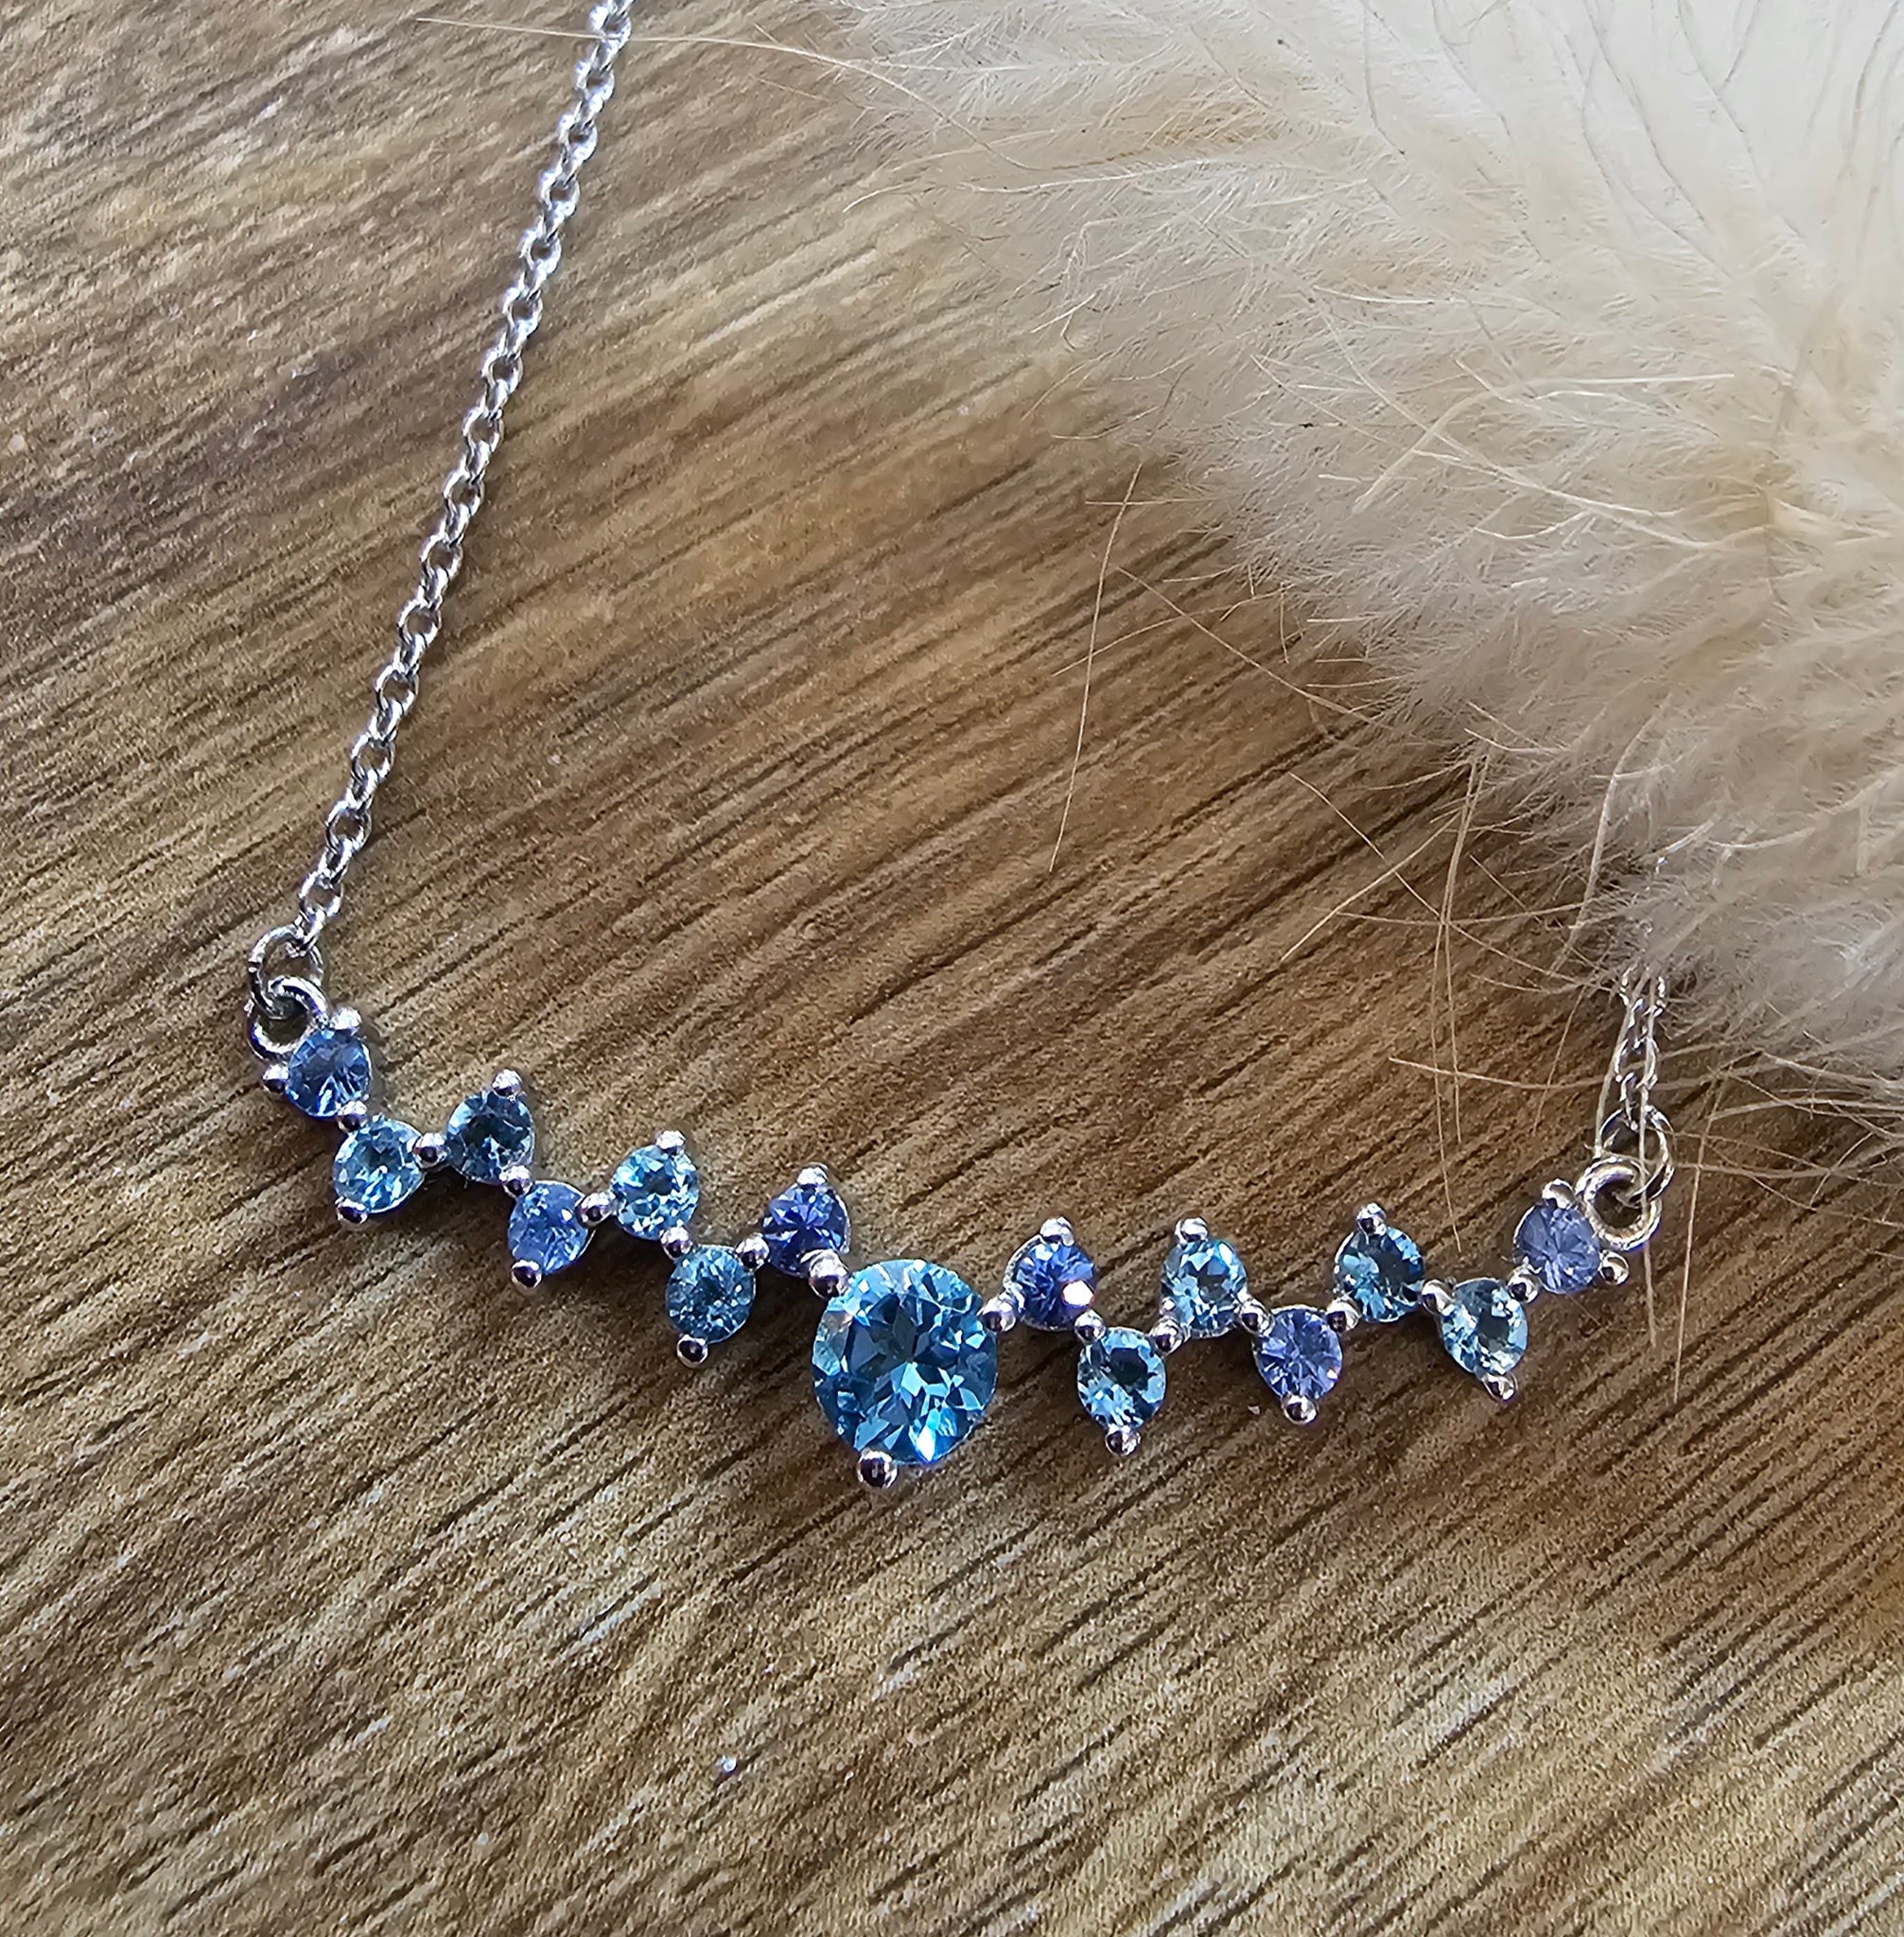 Blue topaz and sapphire necklace